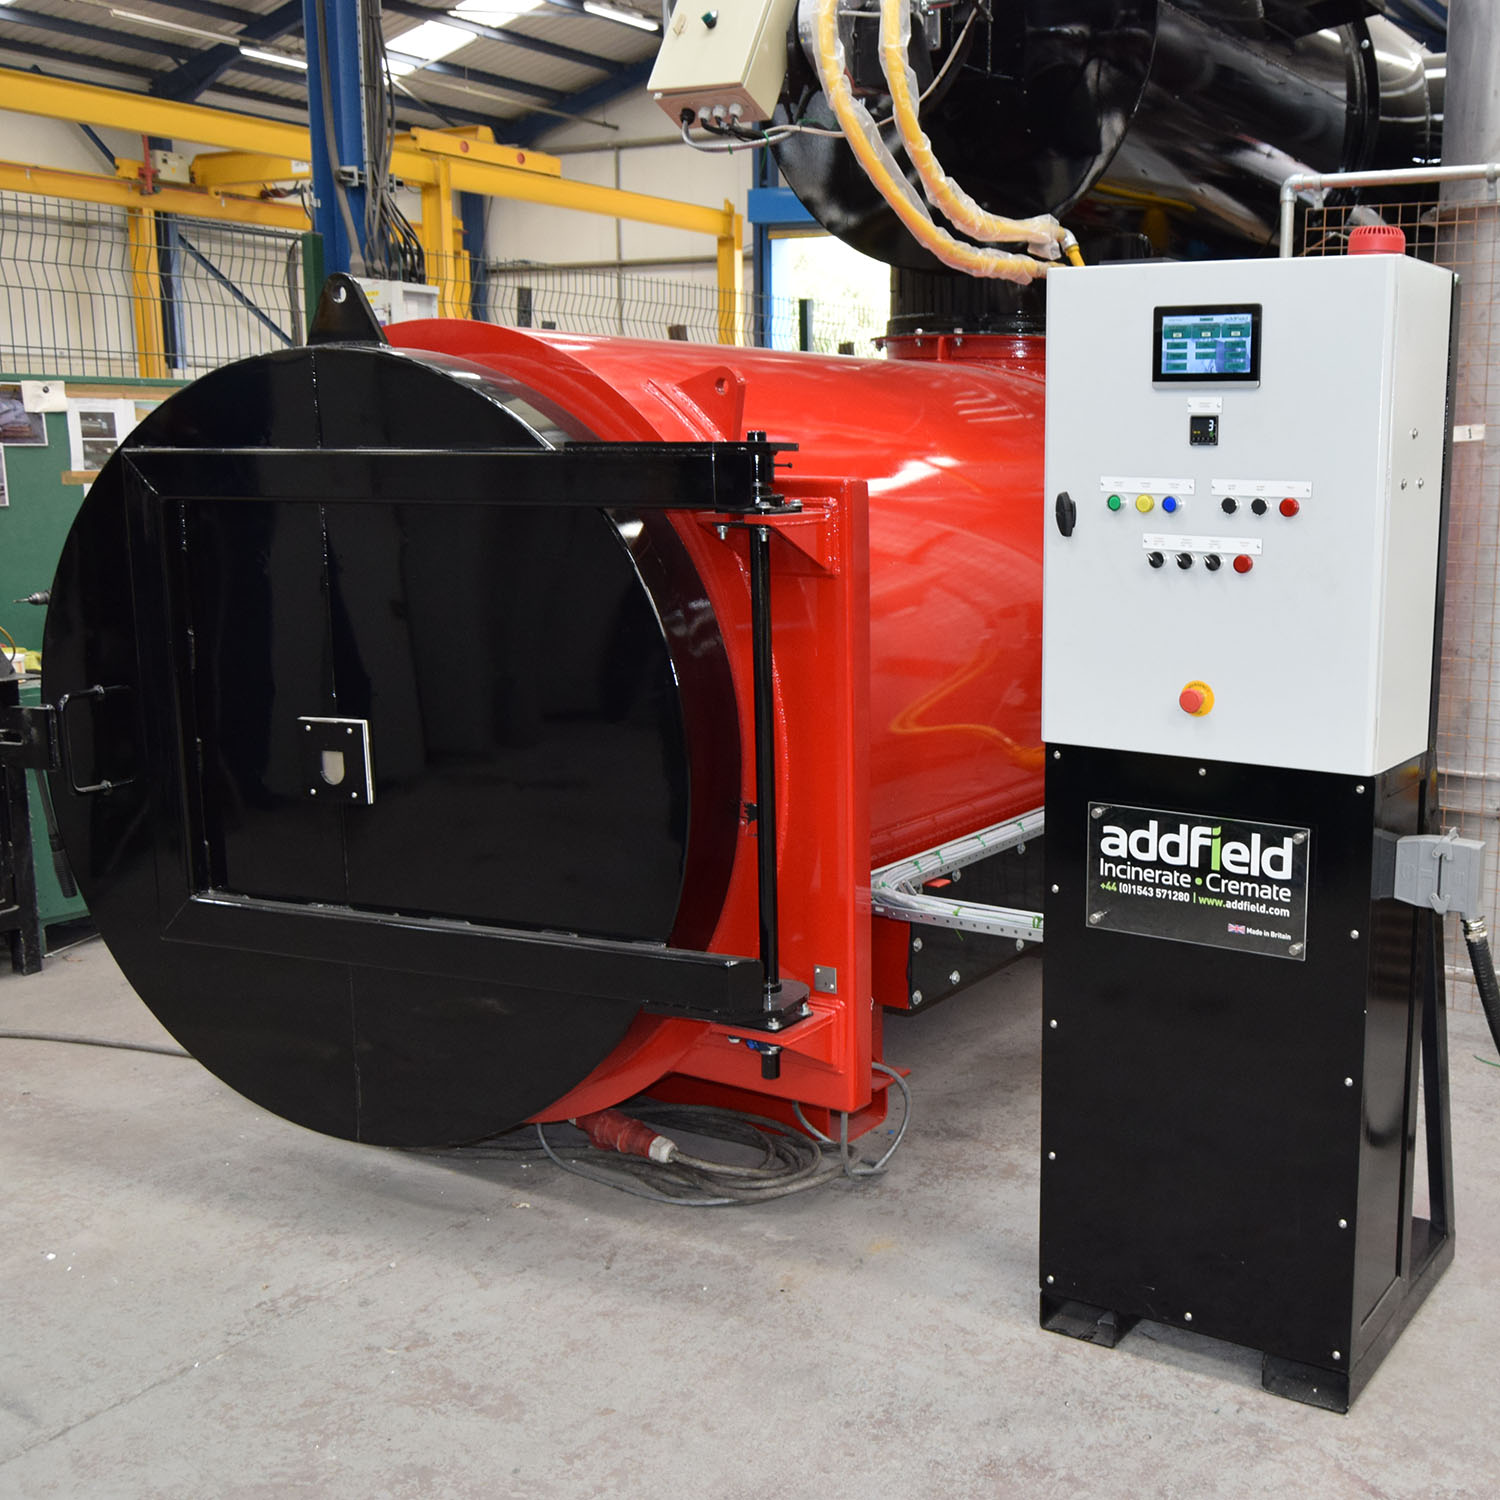 C200 Clinical Waste Incinerator with control panel